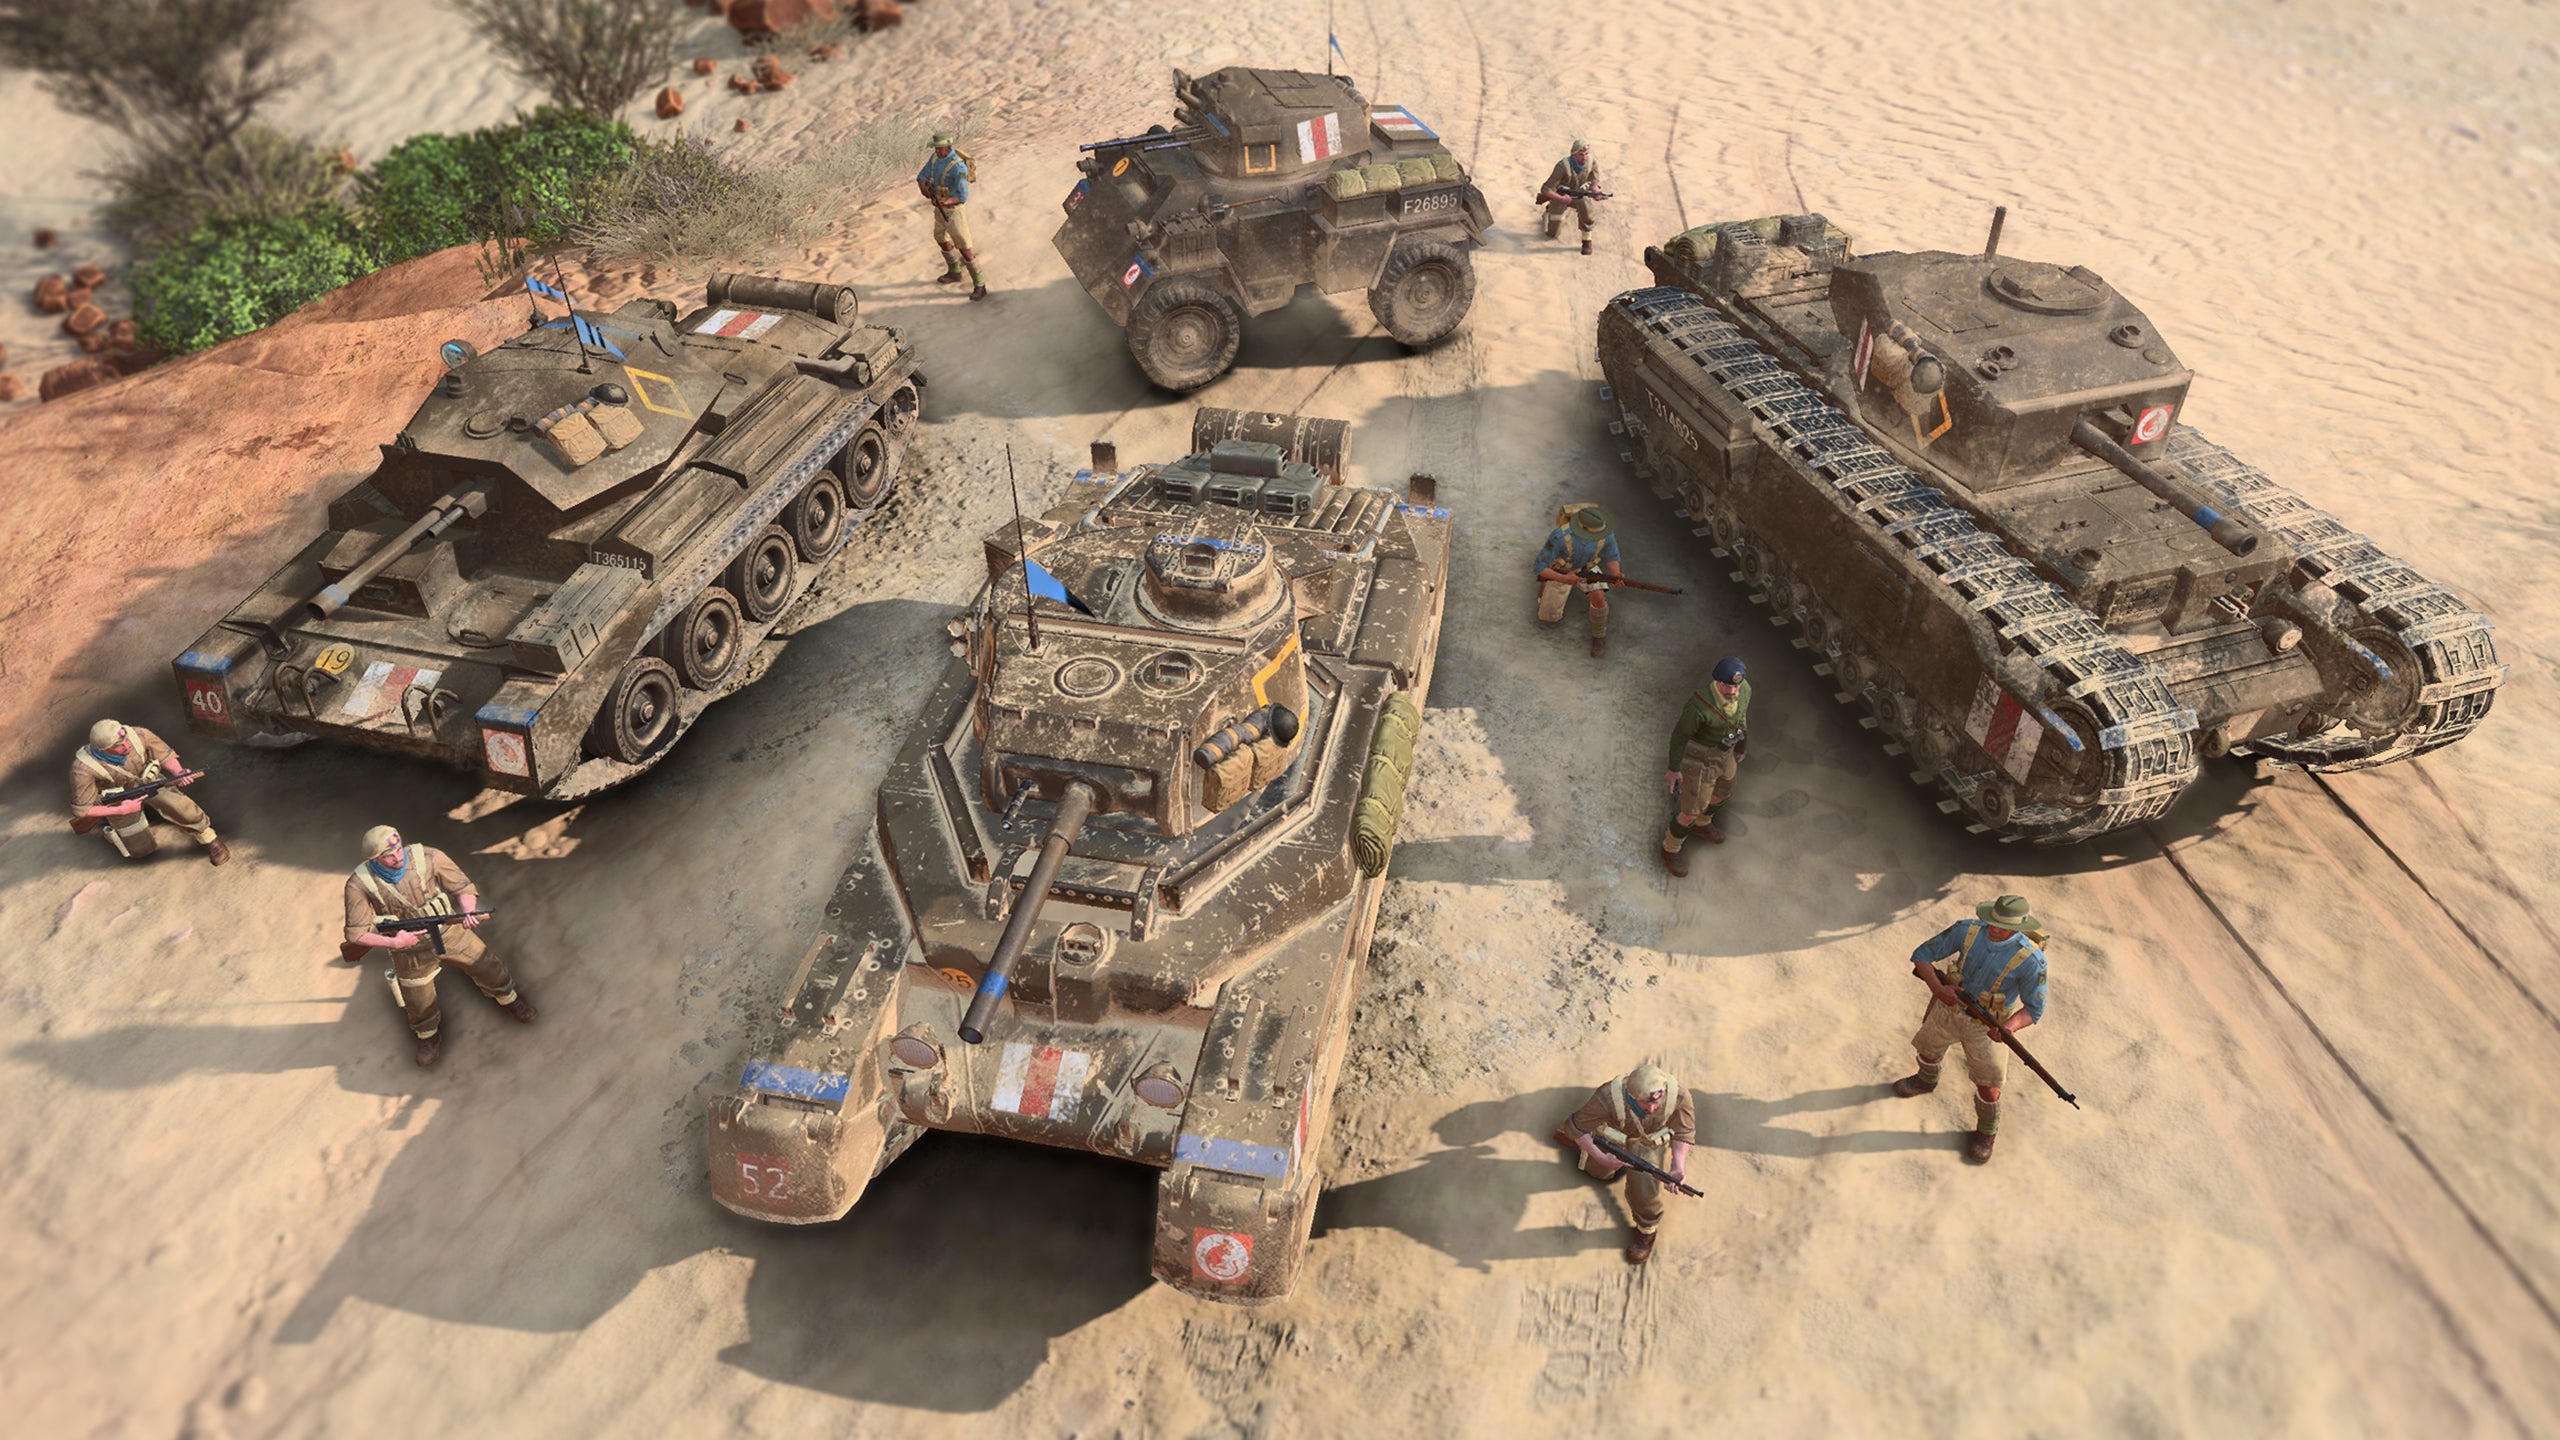 Company of Heroes 3 preview - a view of four British tanks and some infantry units in the desert